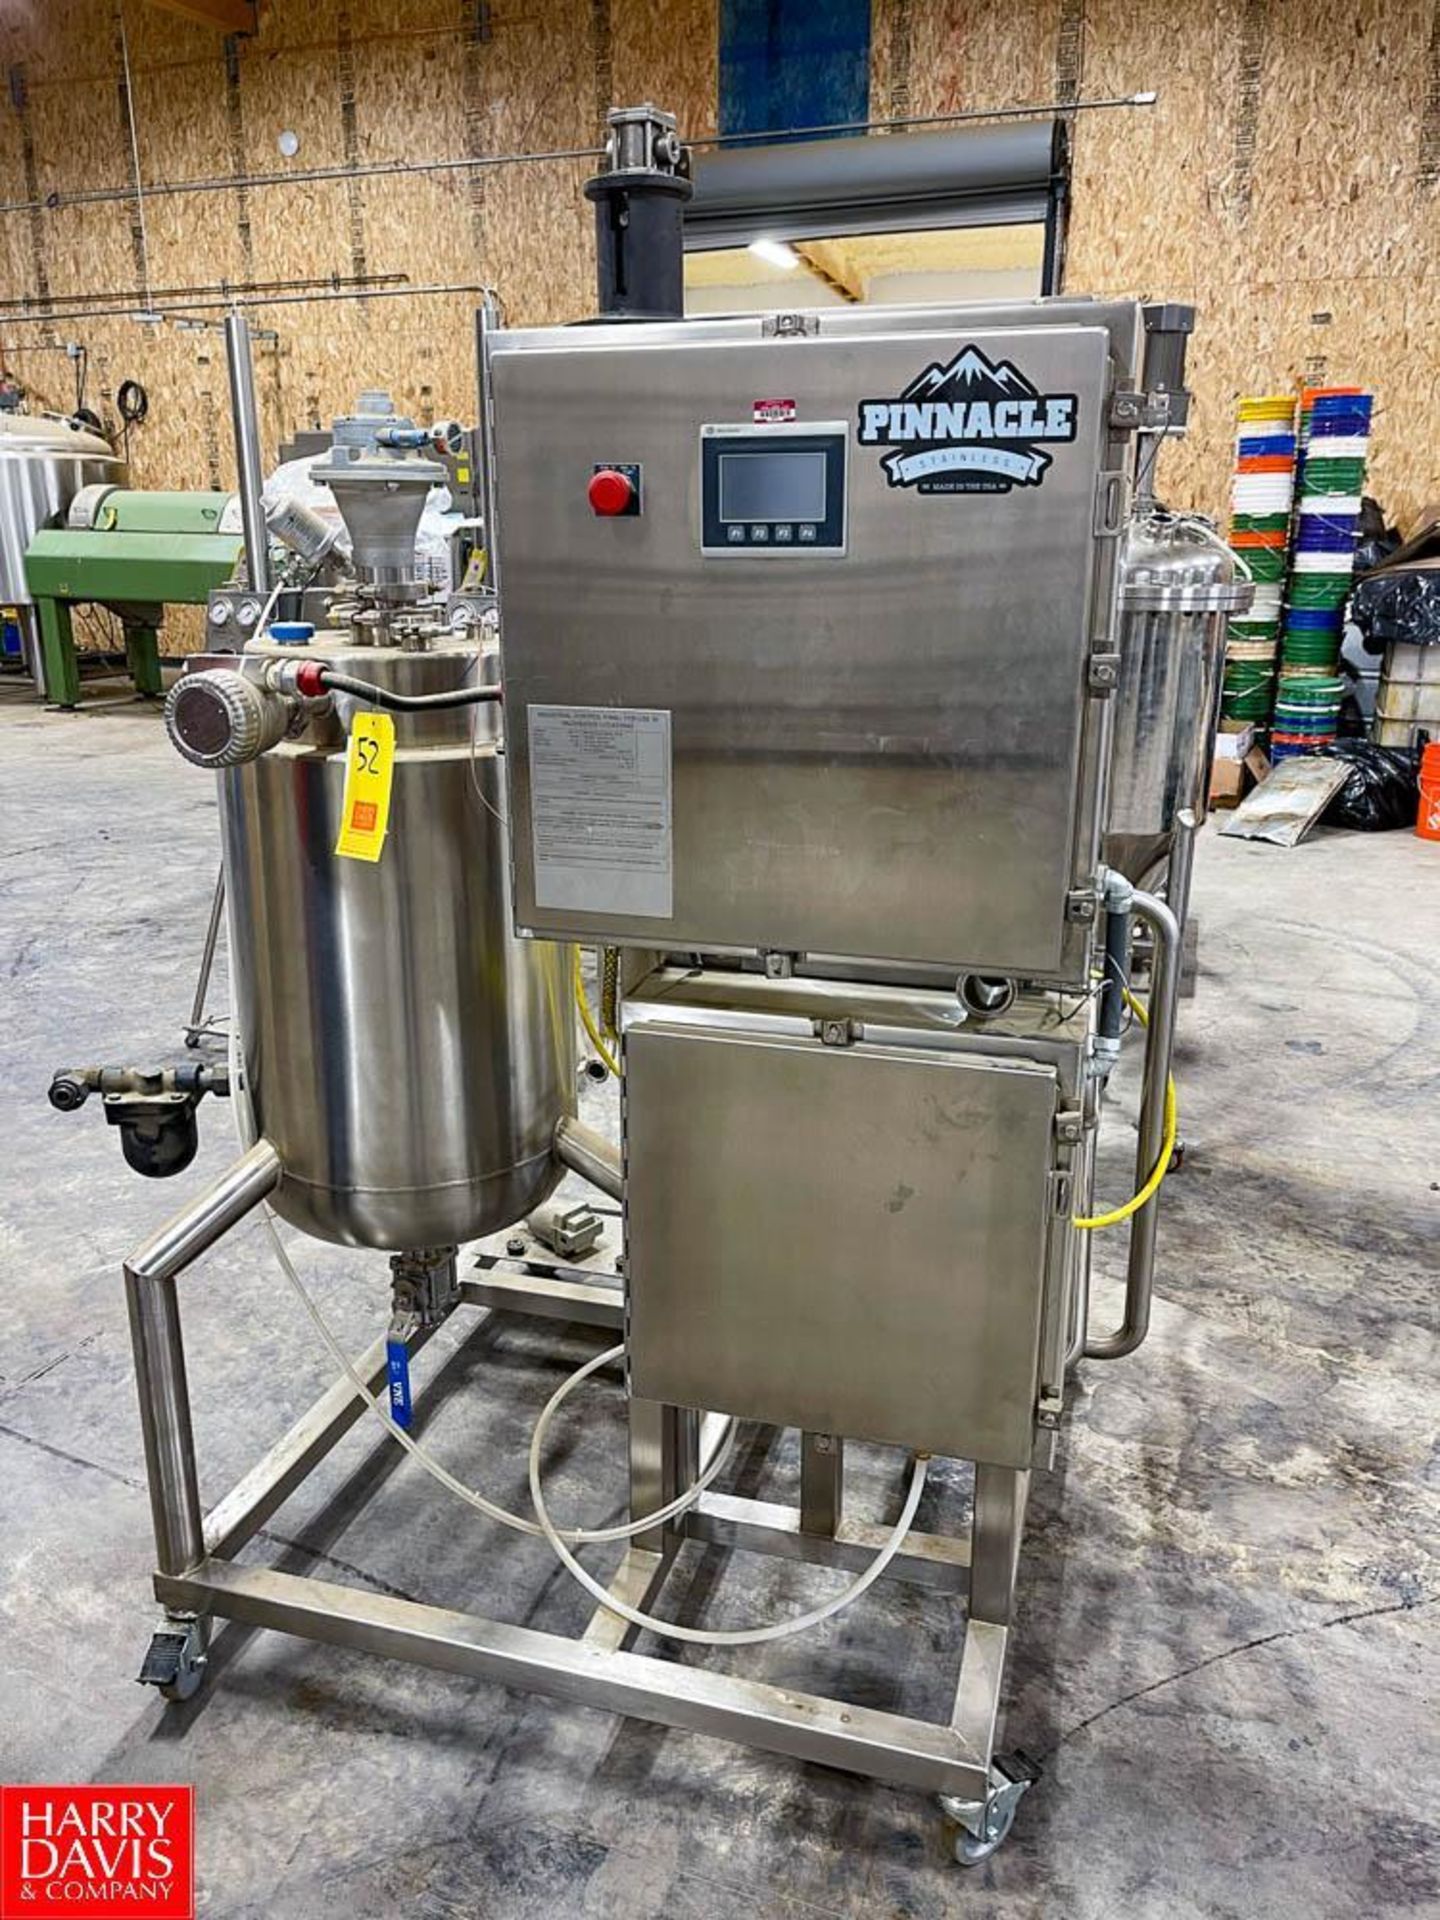 2019 Pinnacle Filtration Skid : S/N 3-001005, Mounted on Portable S/S Frame **Never Installed